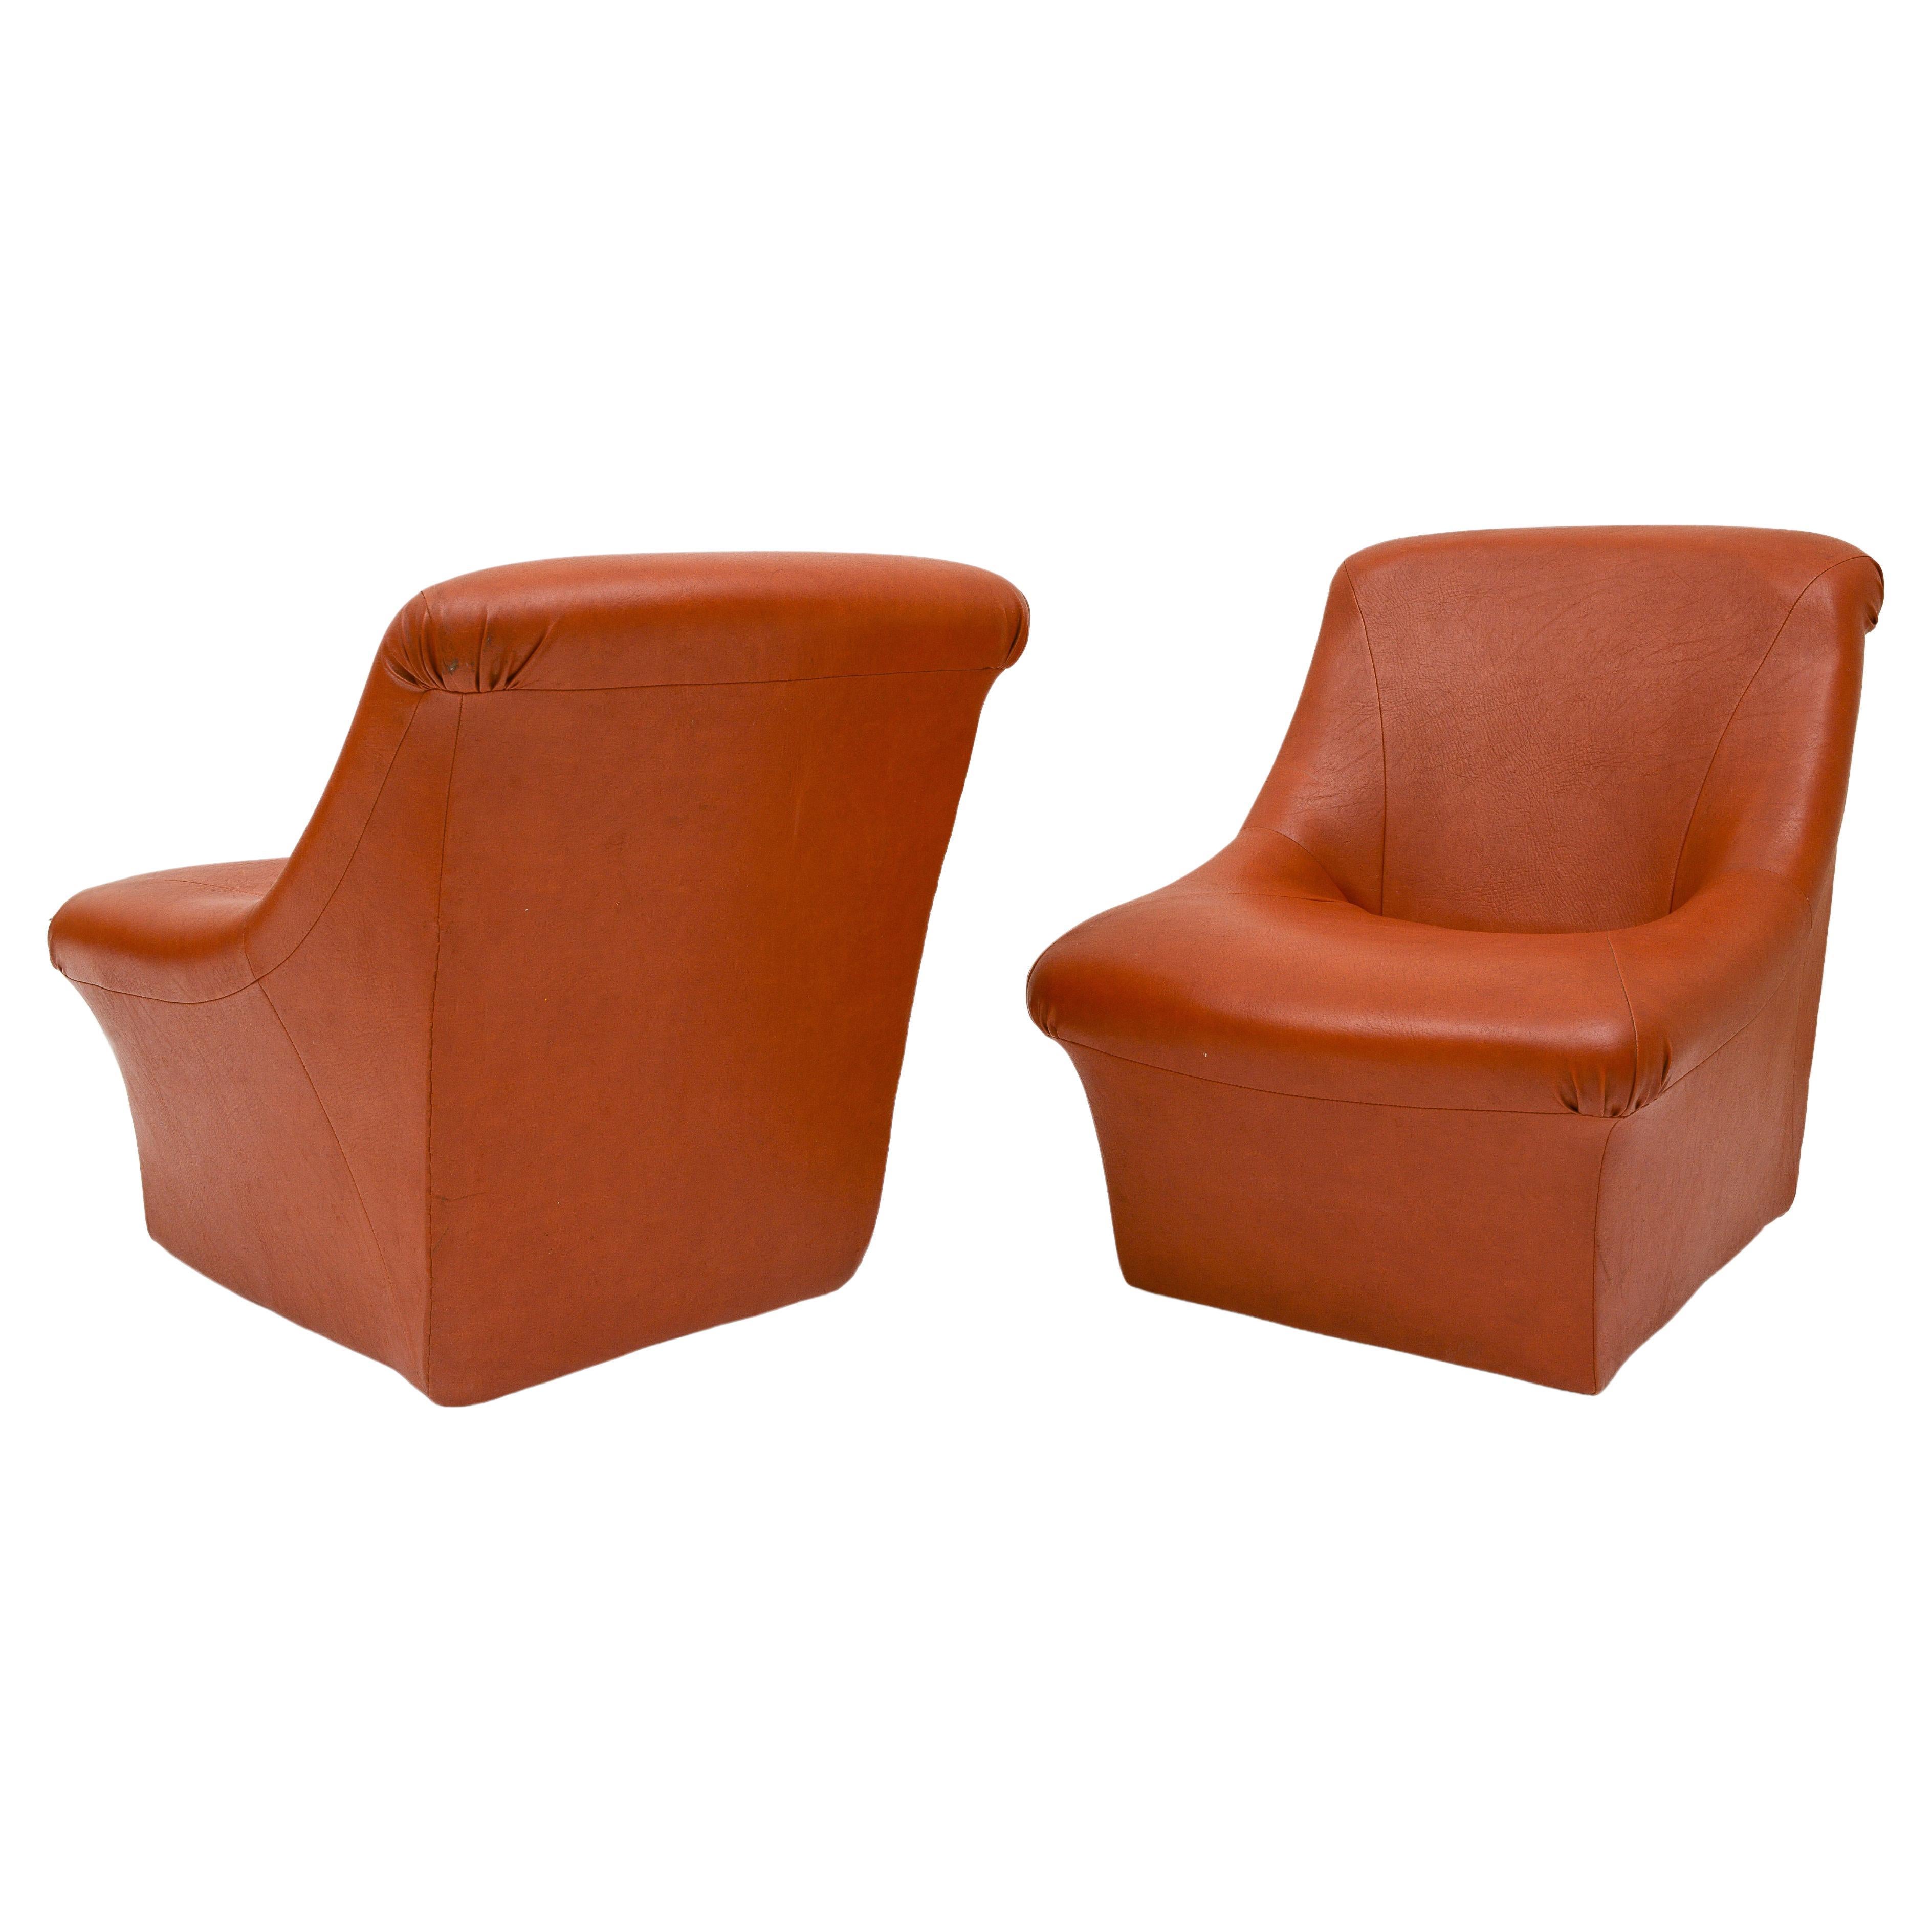 70's Brown Cognac Leatherette Pair of Chairs